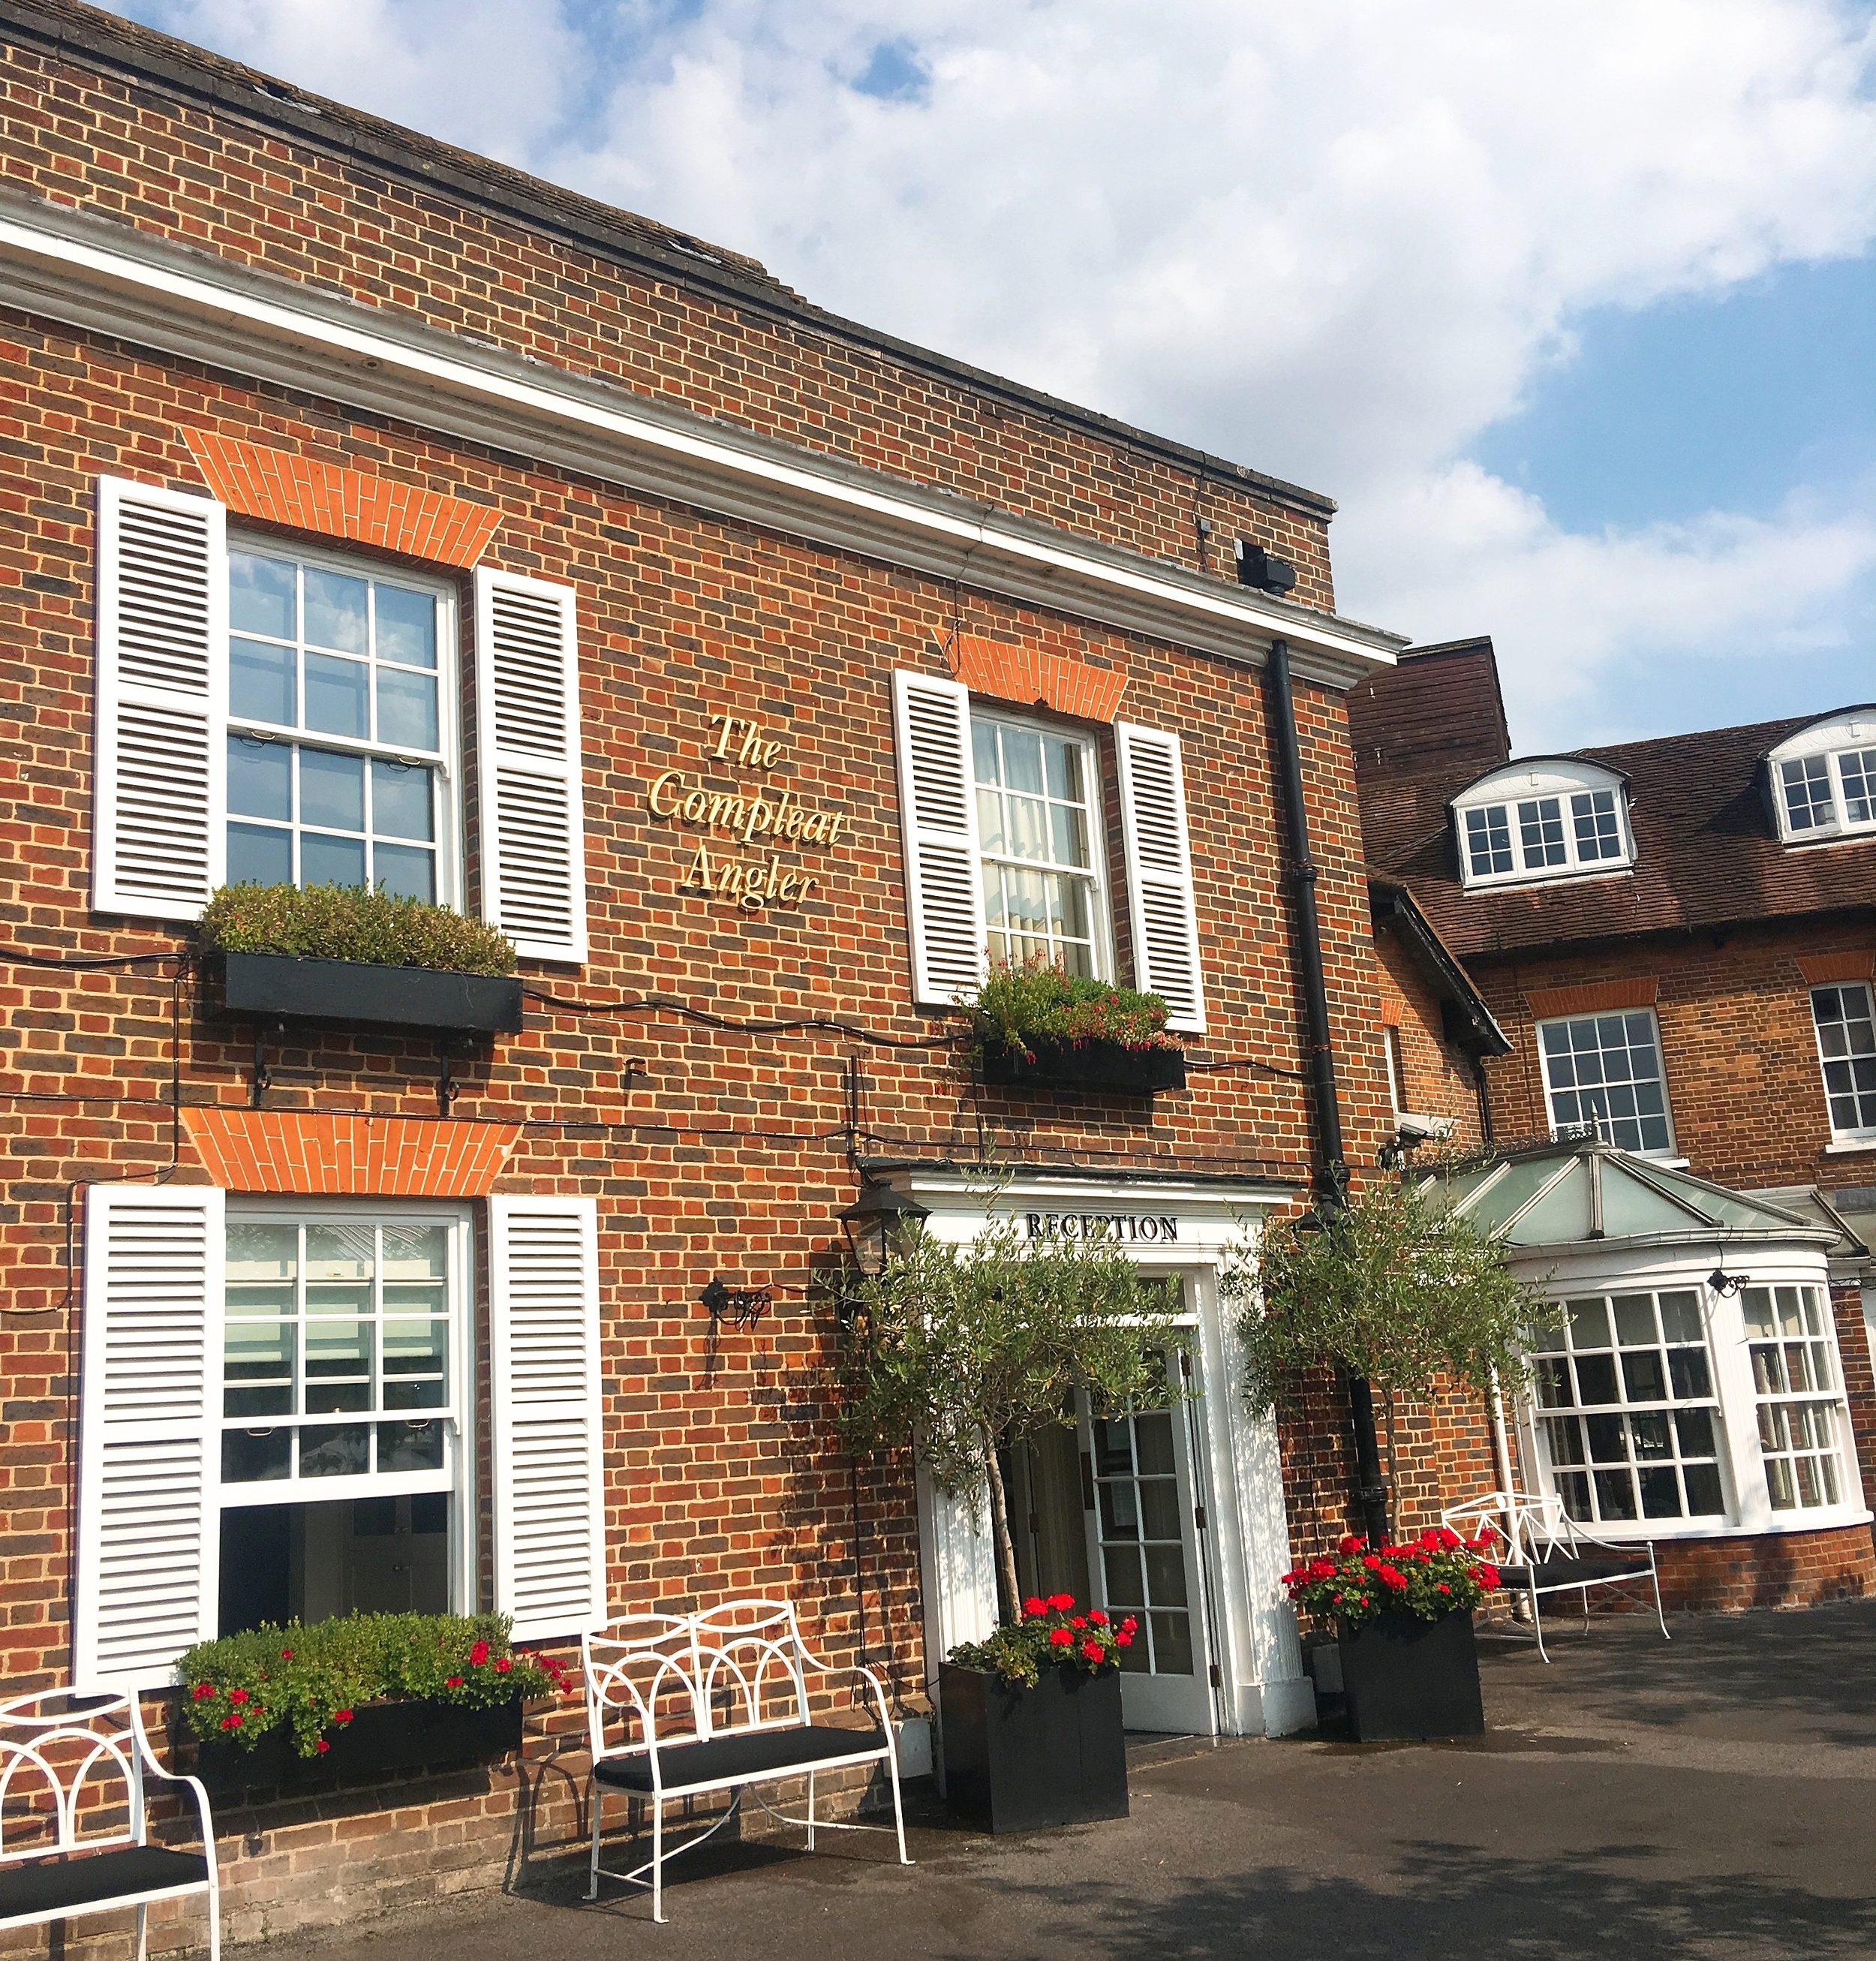 Macdonald Compleat Angler Hotel Review, Marlow, Travel blog